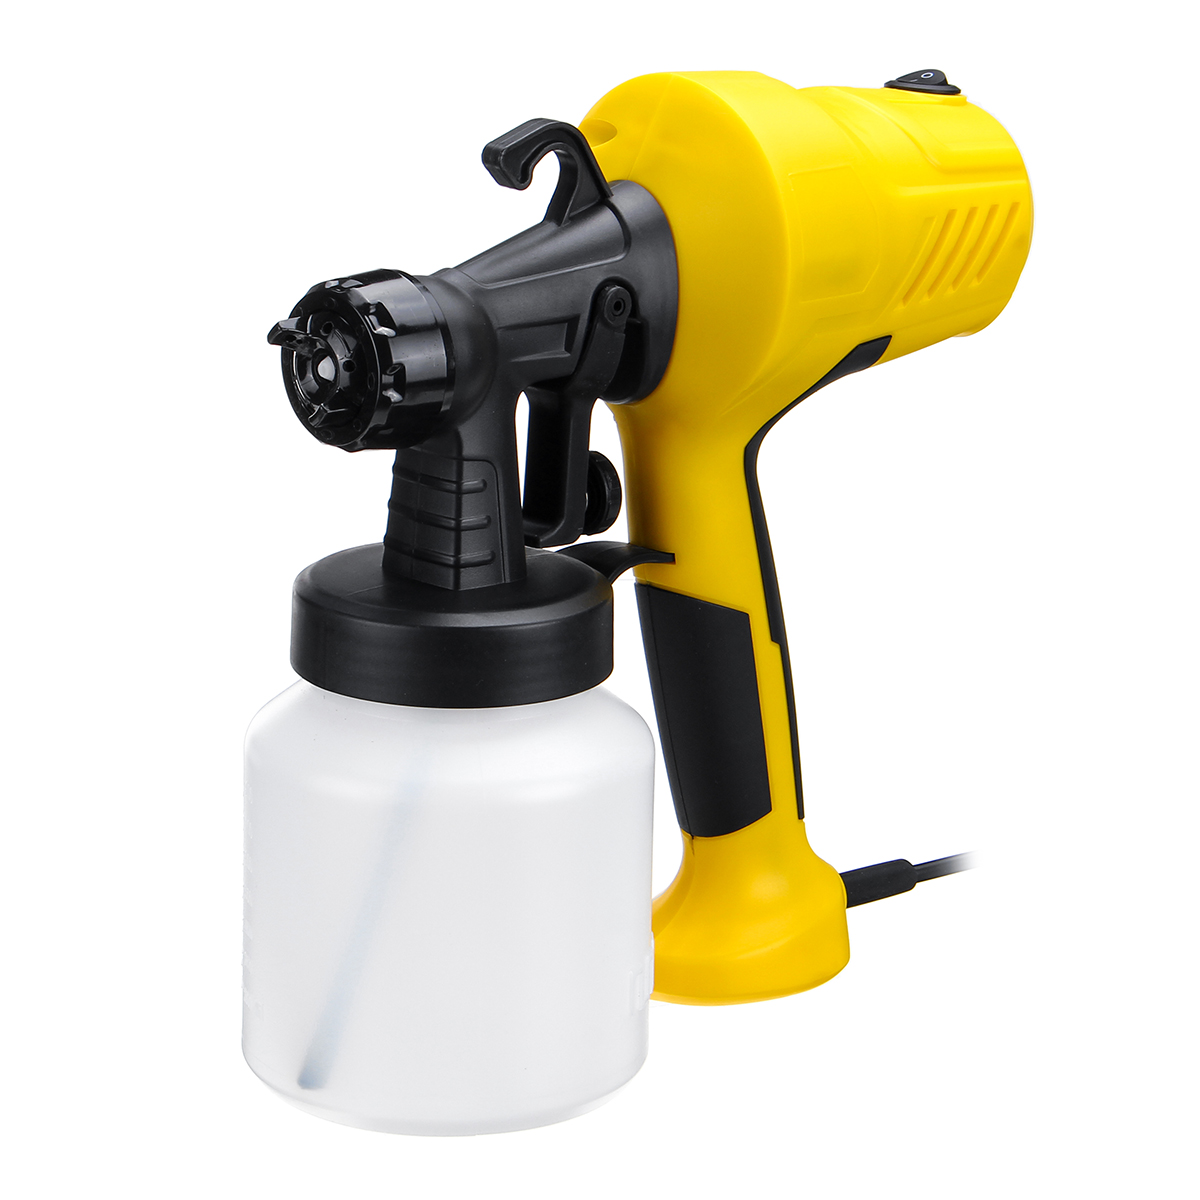 

220V 400W Power Painter Home Paint Electric Sprayer Spray for Painting Projects Painting Tool